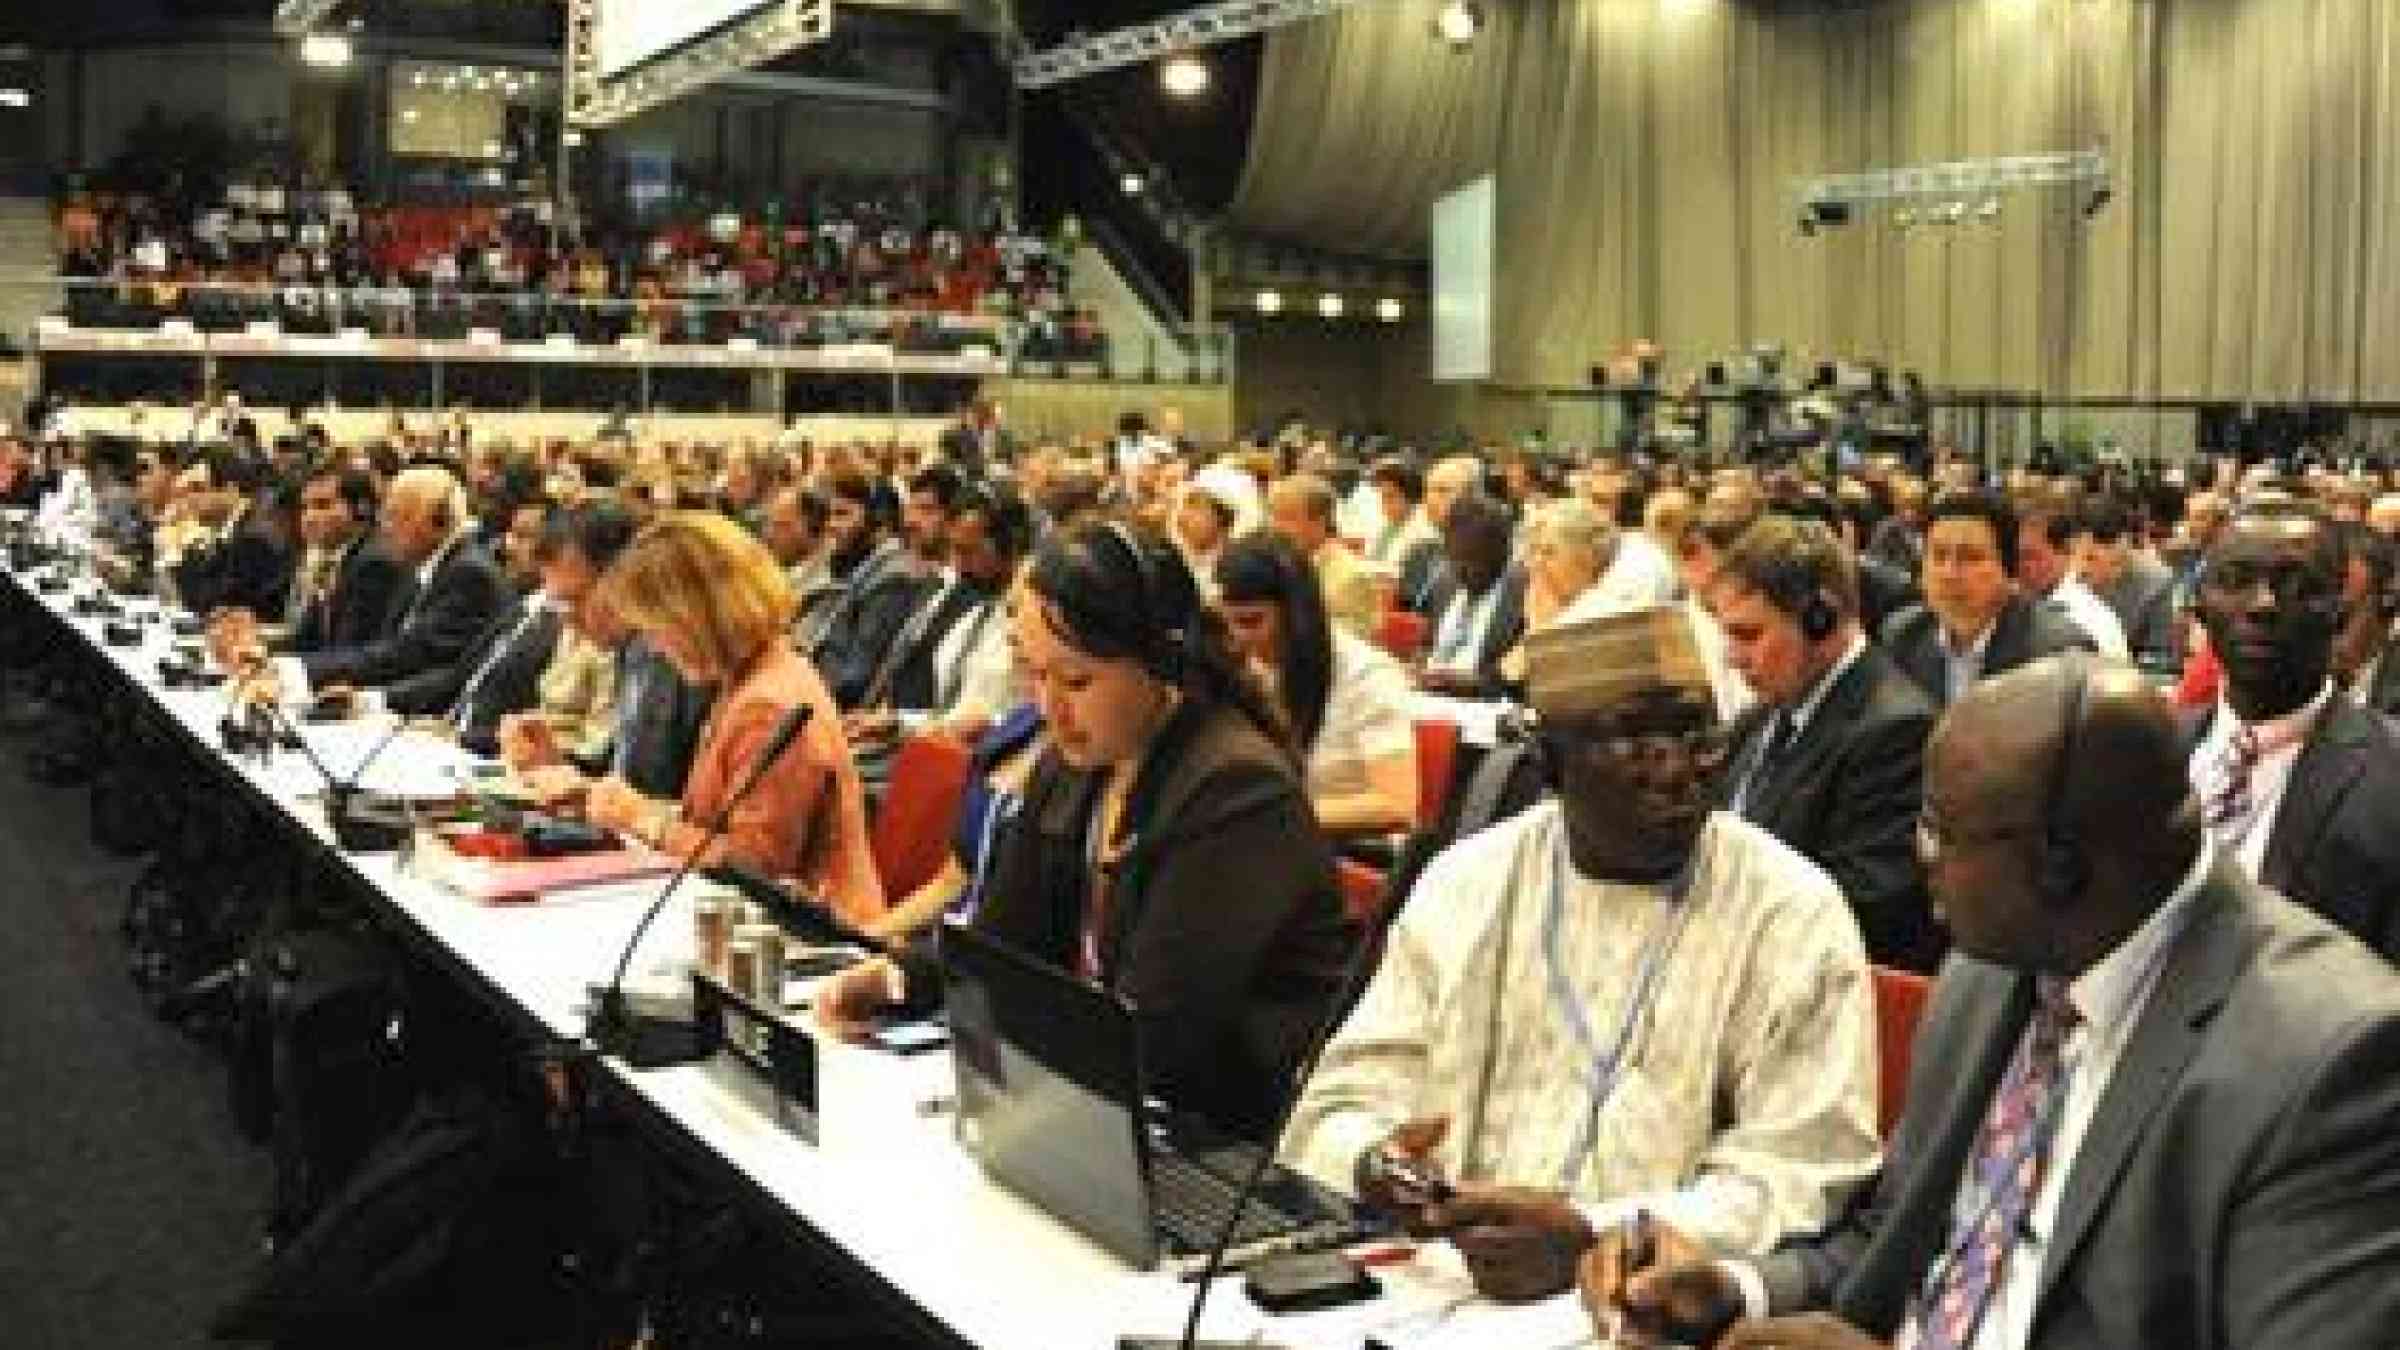 Delegates at the Climate Change Conference in Durban